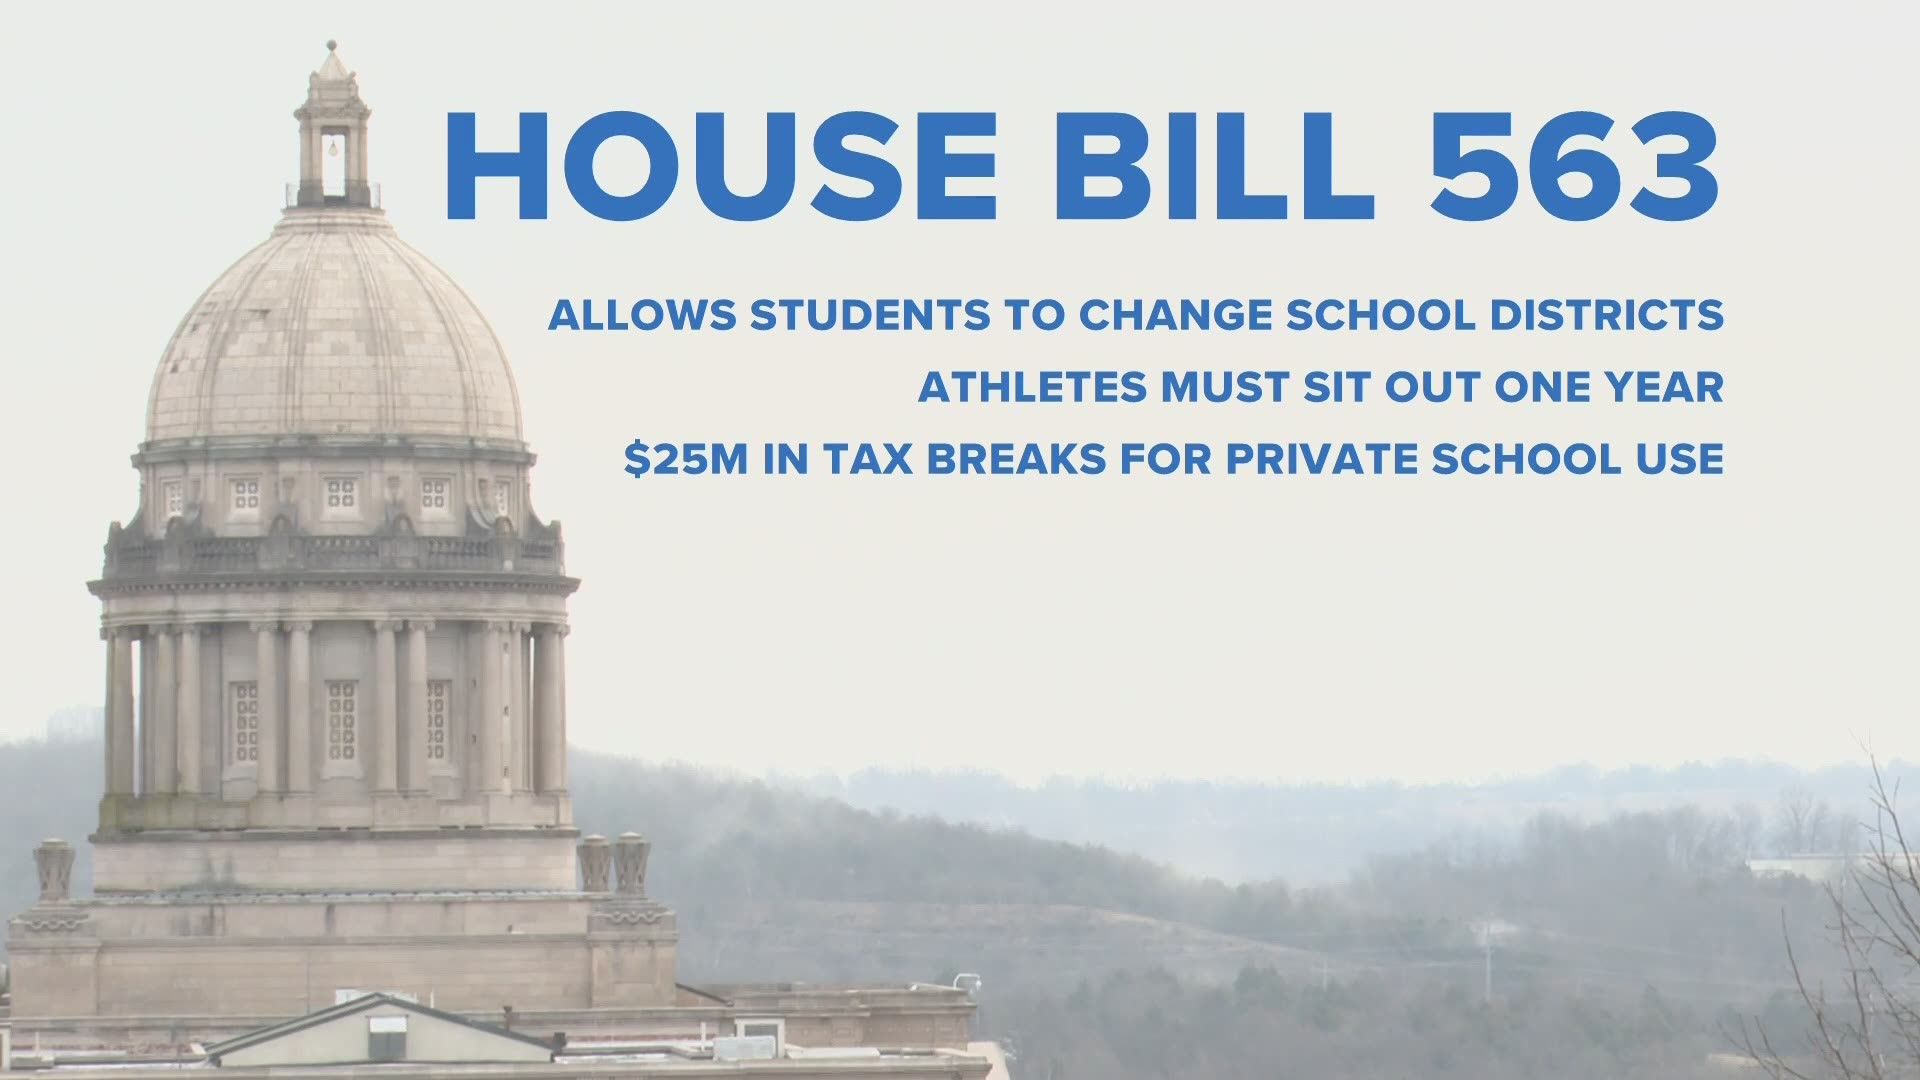 Supporters of Kentucky's controversial school choice bill met to discuss next steps as they await for the legislation to become law this summer.